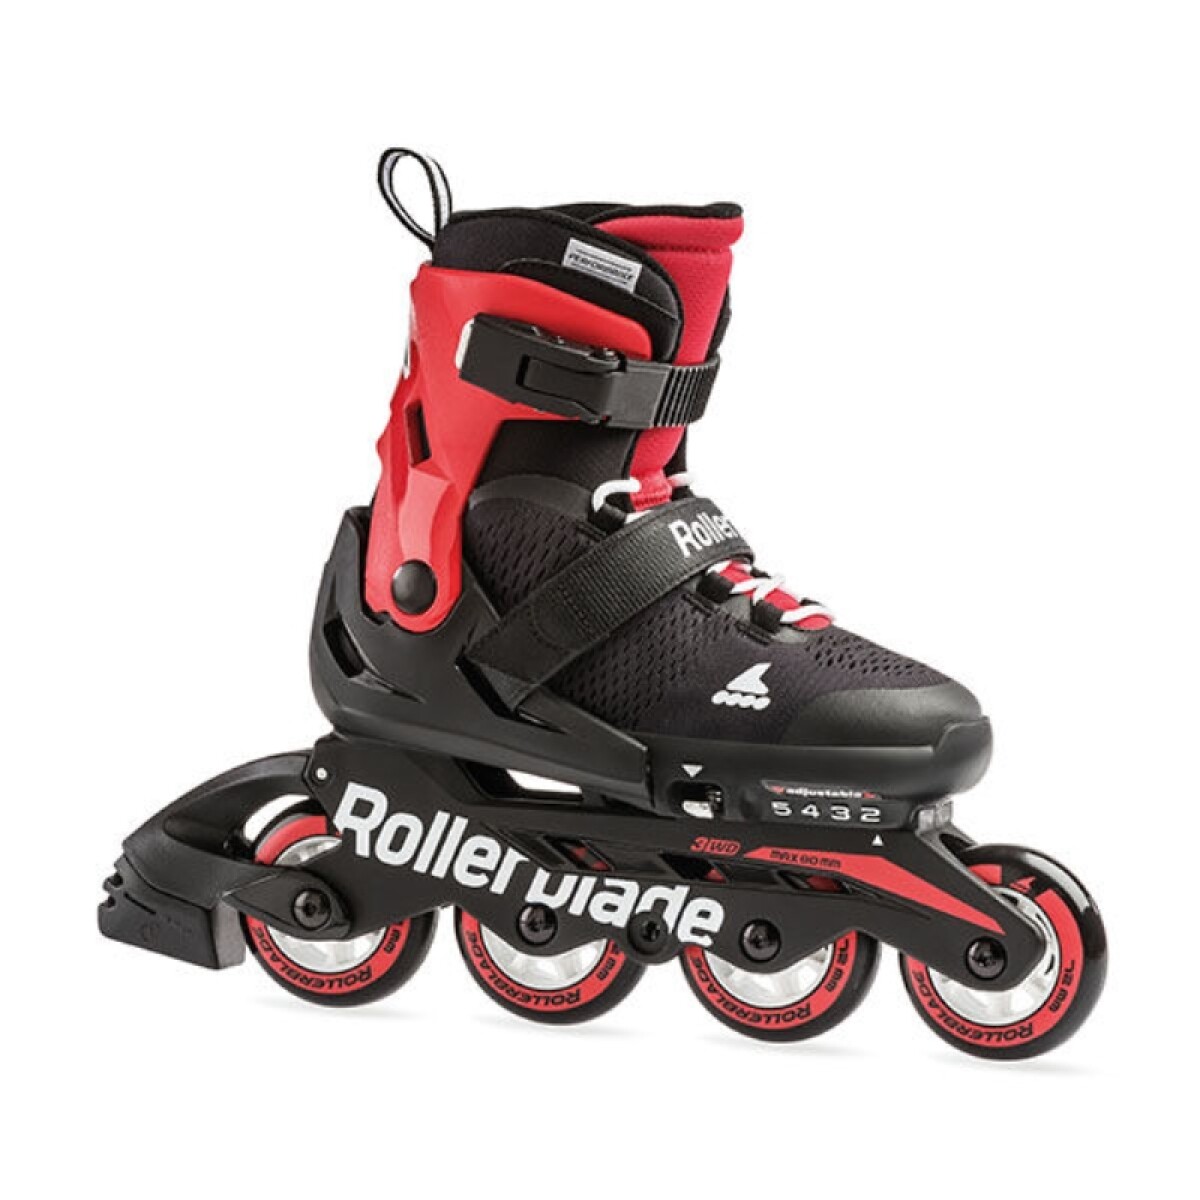 Roller Profesional Rollerblade Microblade Regulable Max.60kg - Negro/rojo 